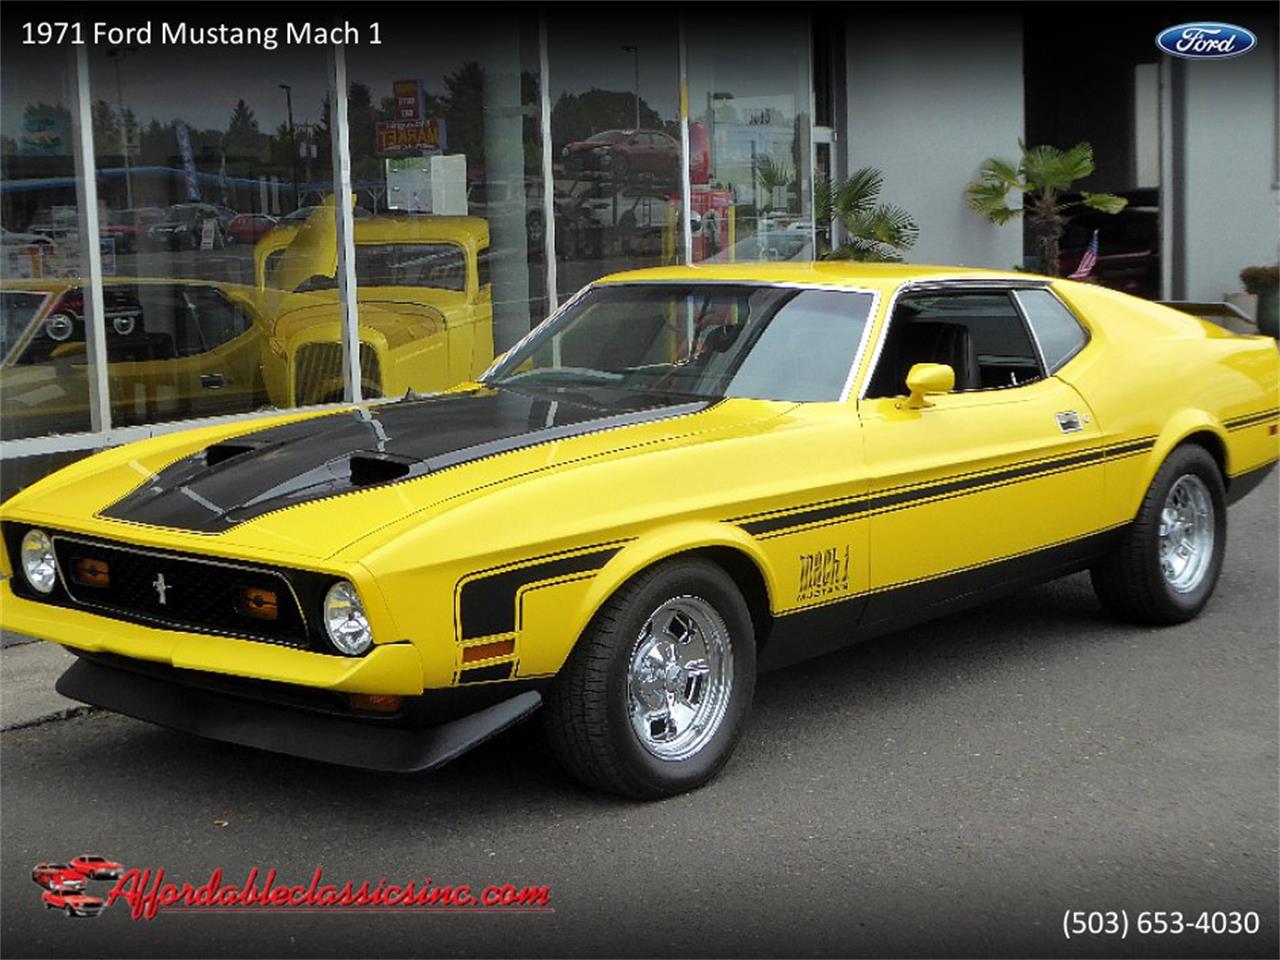 1971 Ford Mustang Mach 1 for Sale | ClassicCars.com | CC-1231877